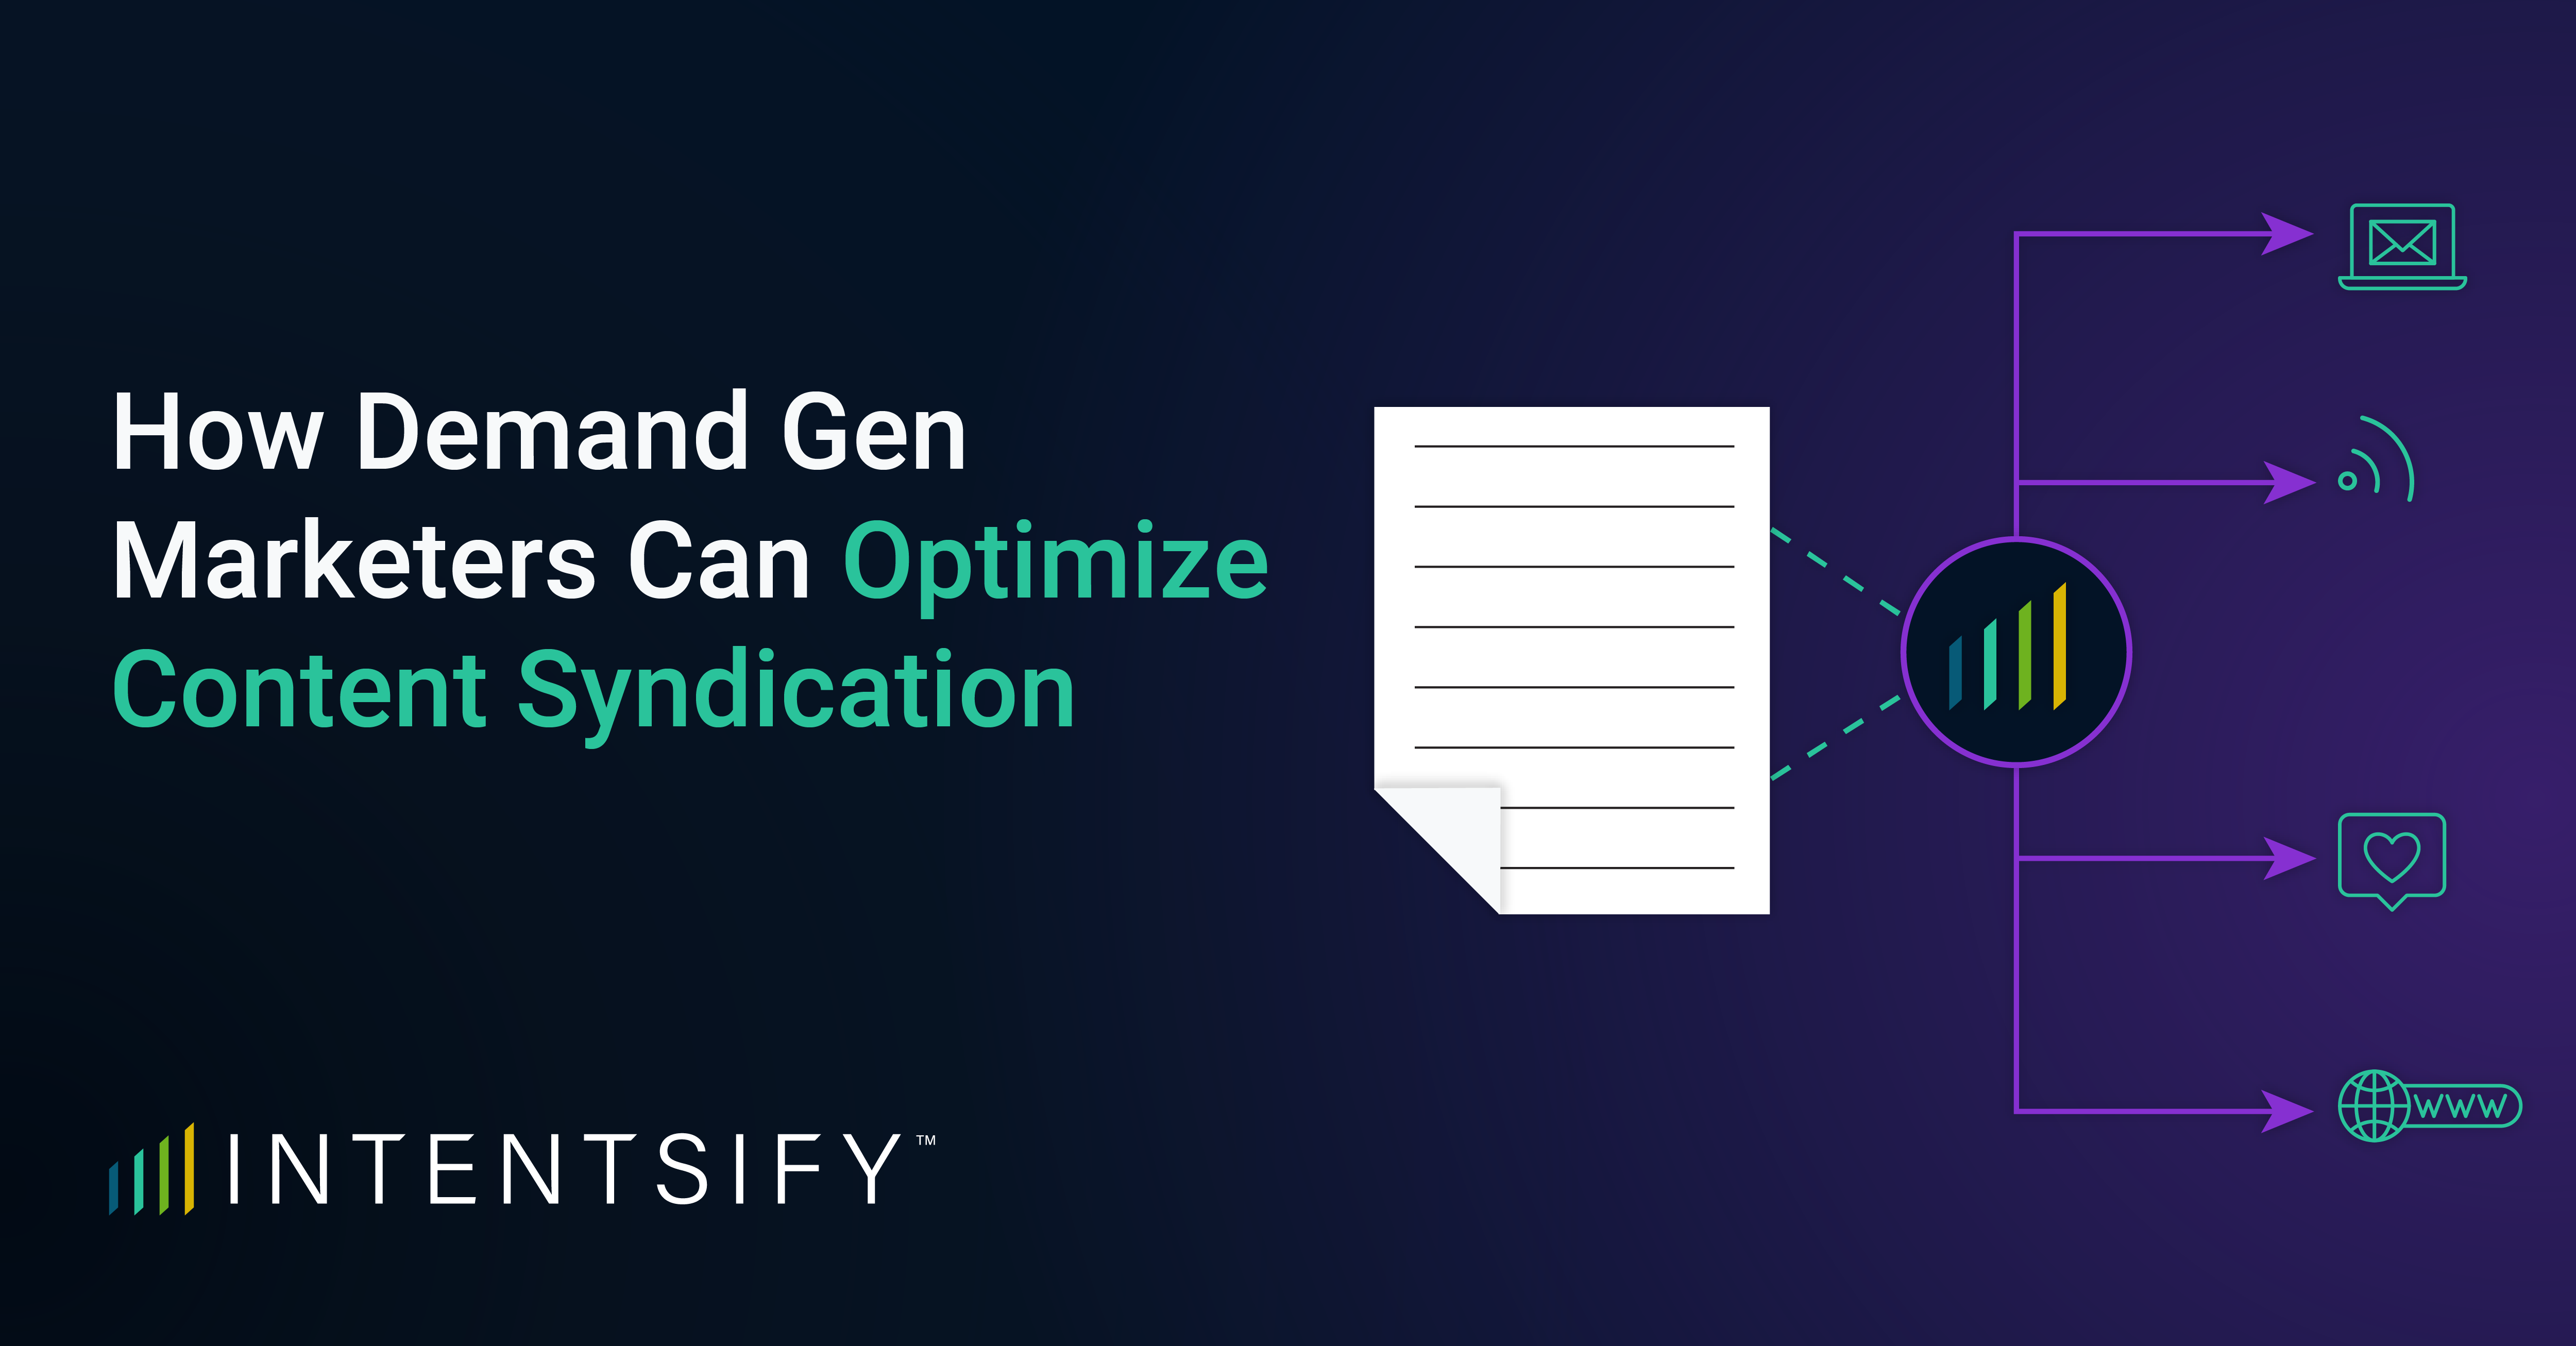 How Demand Gen Marketers Can Optimize Content Syndication